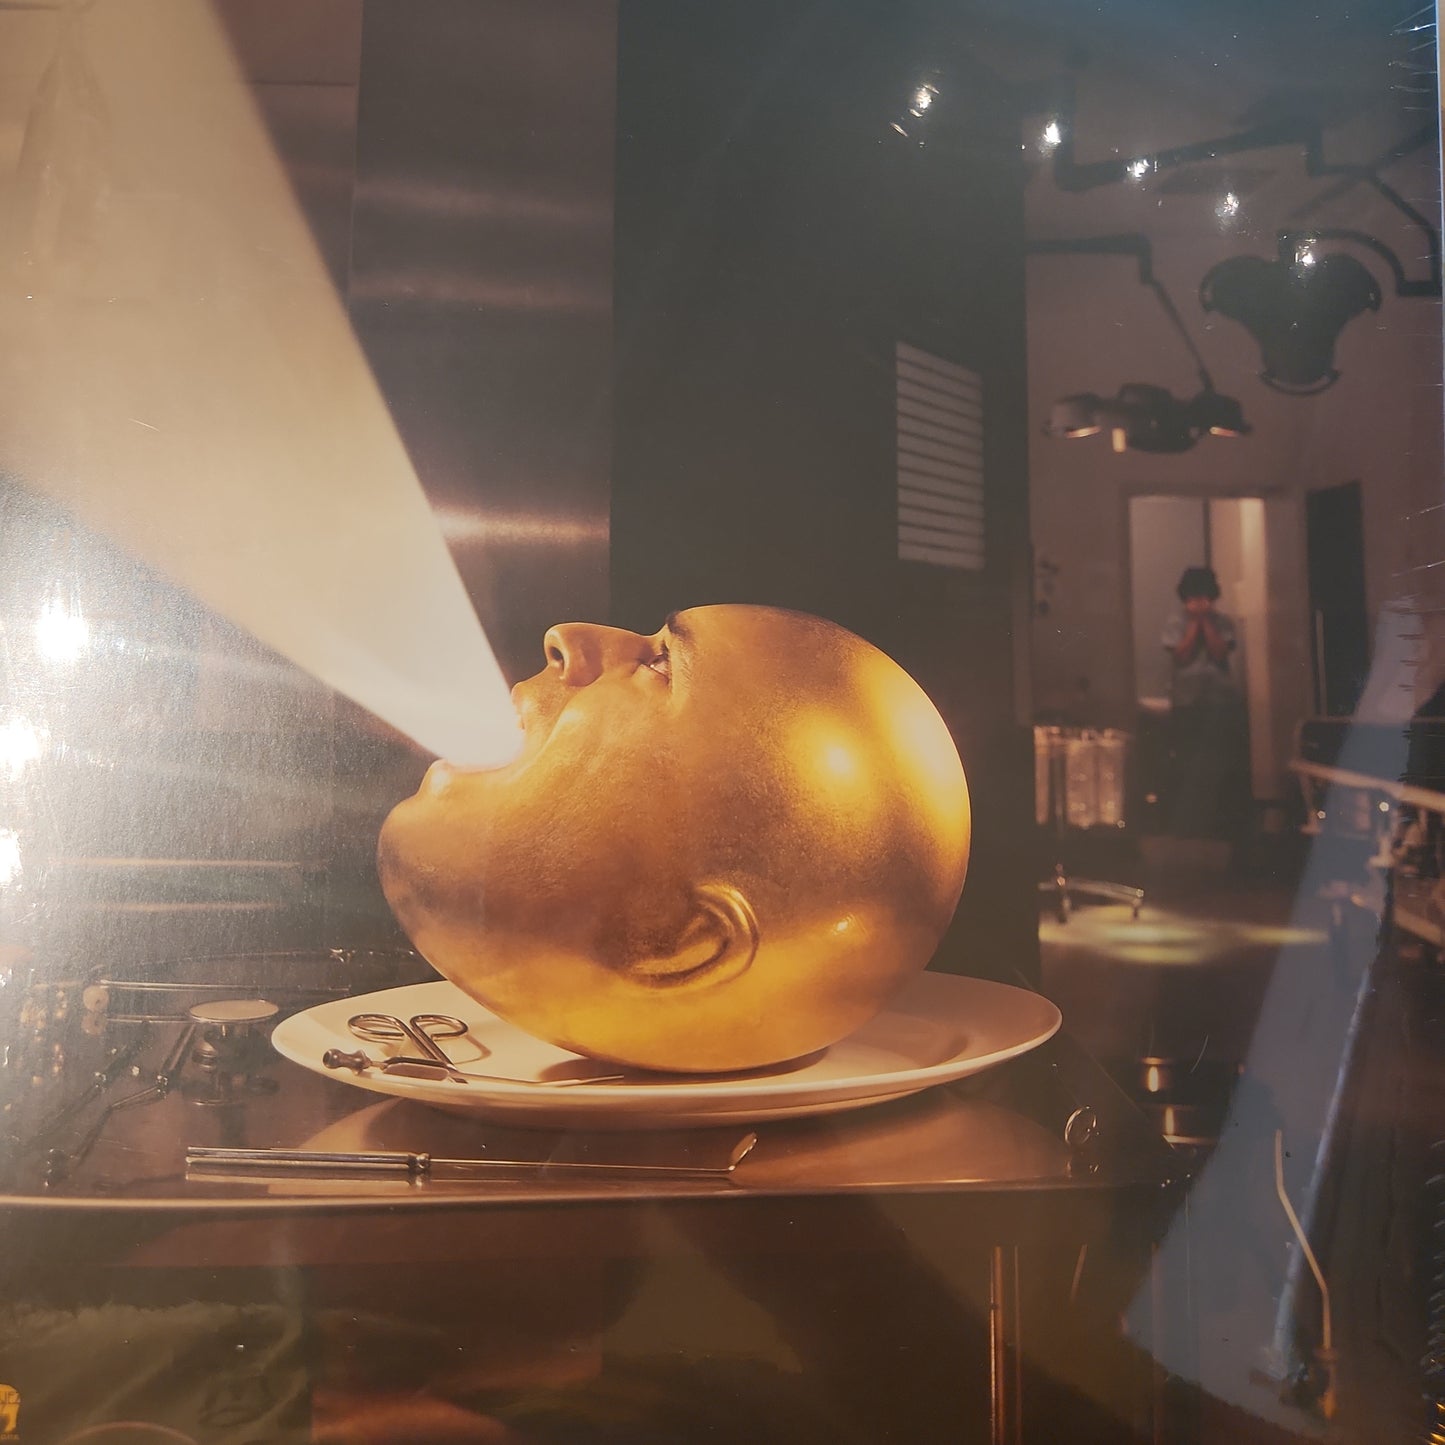 Mars Volta - DeLoused in the Comatorium - Limited Green and Gold Vinyl LP